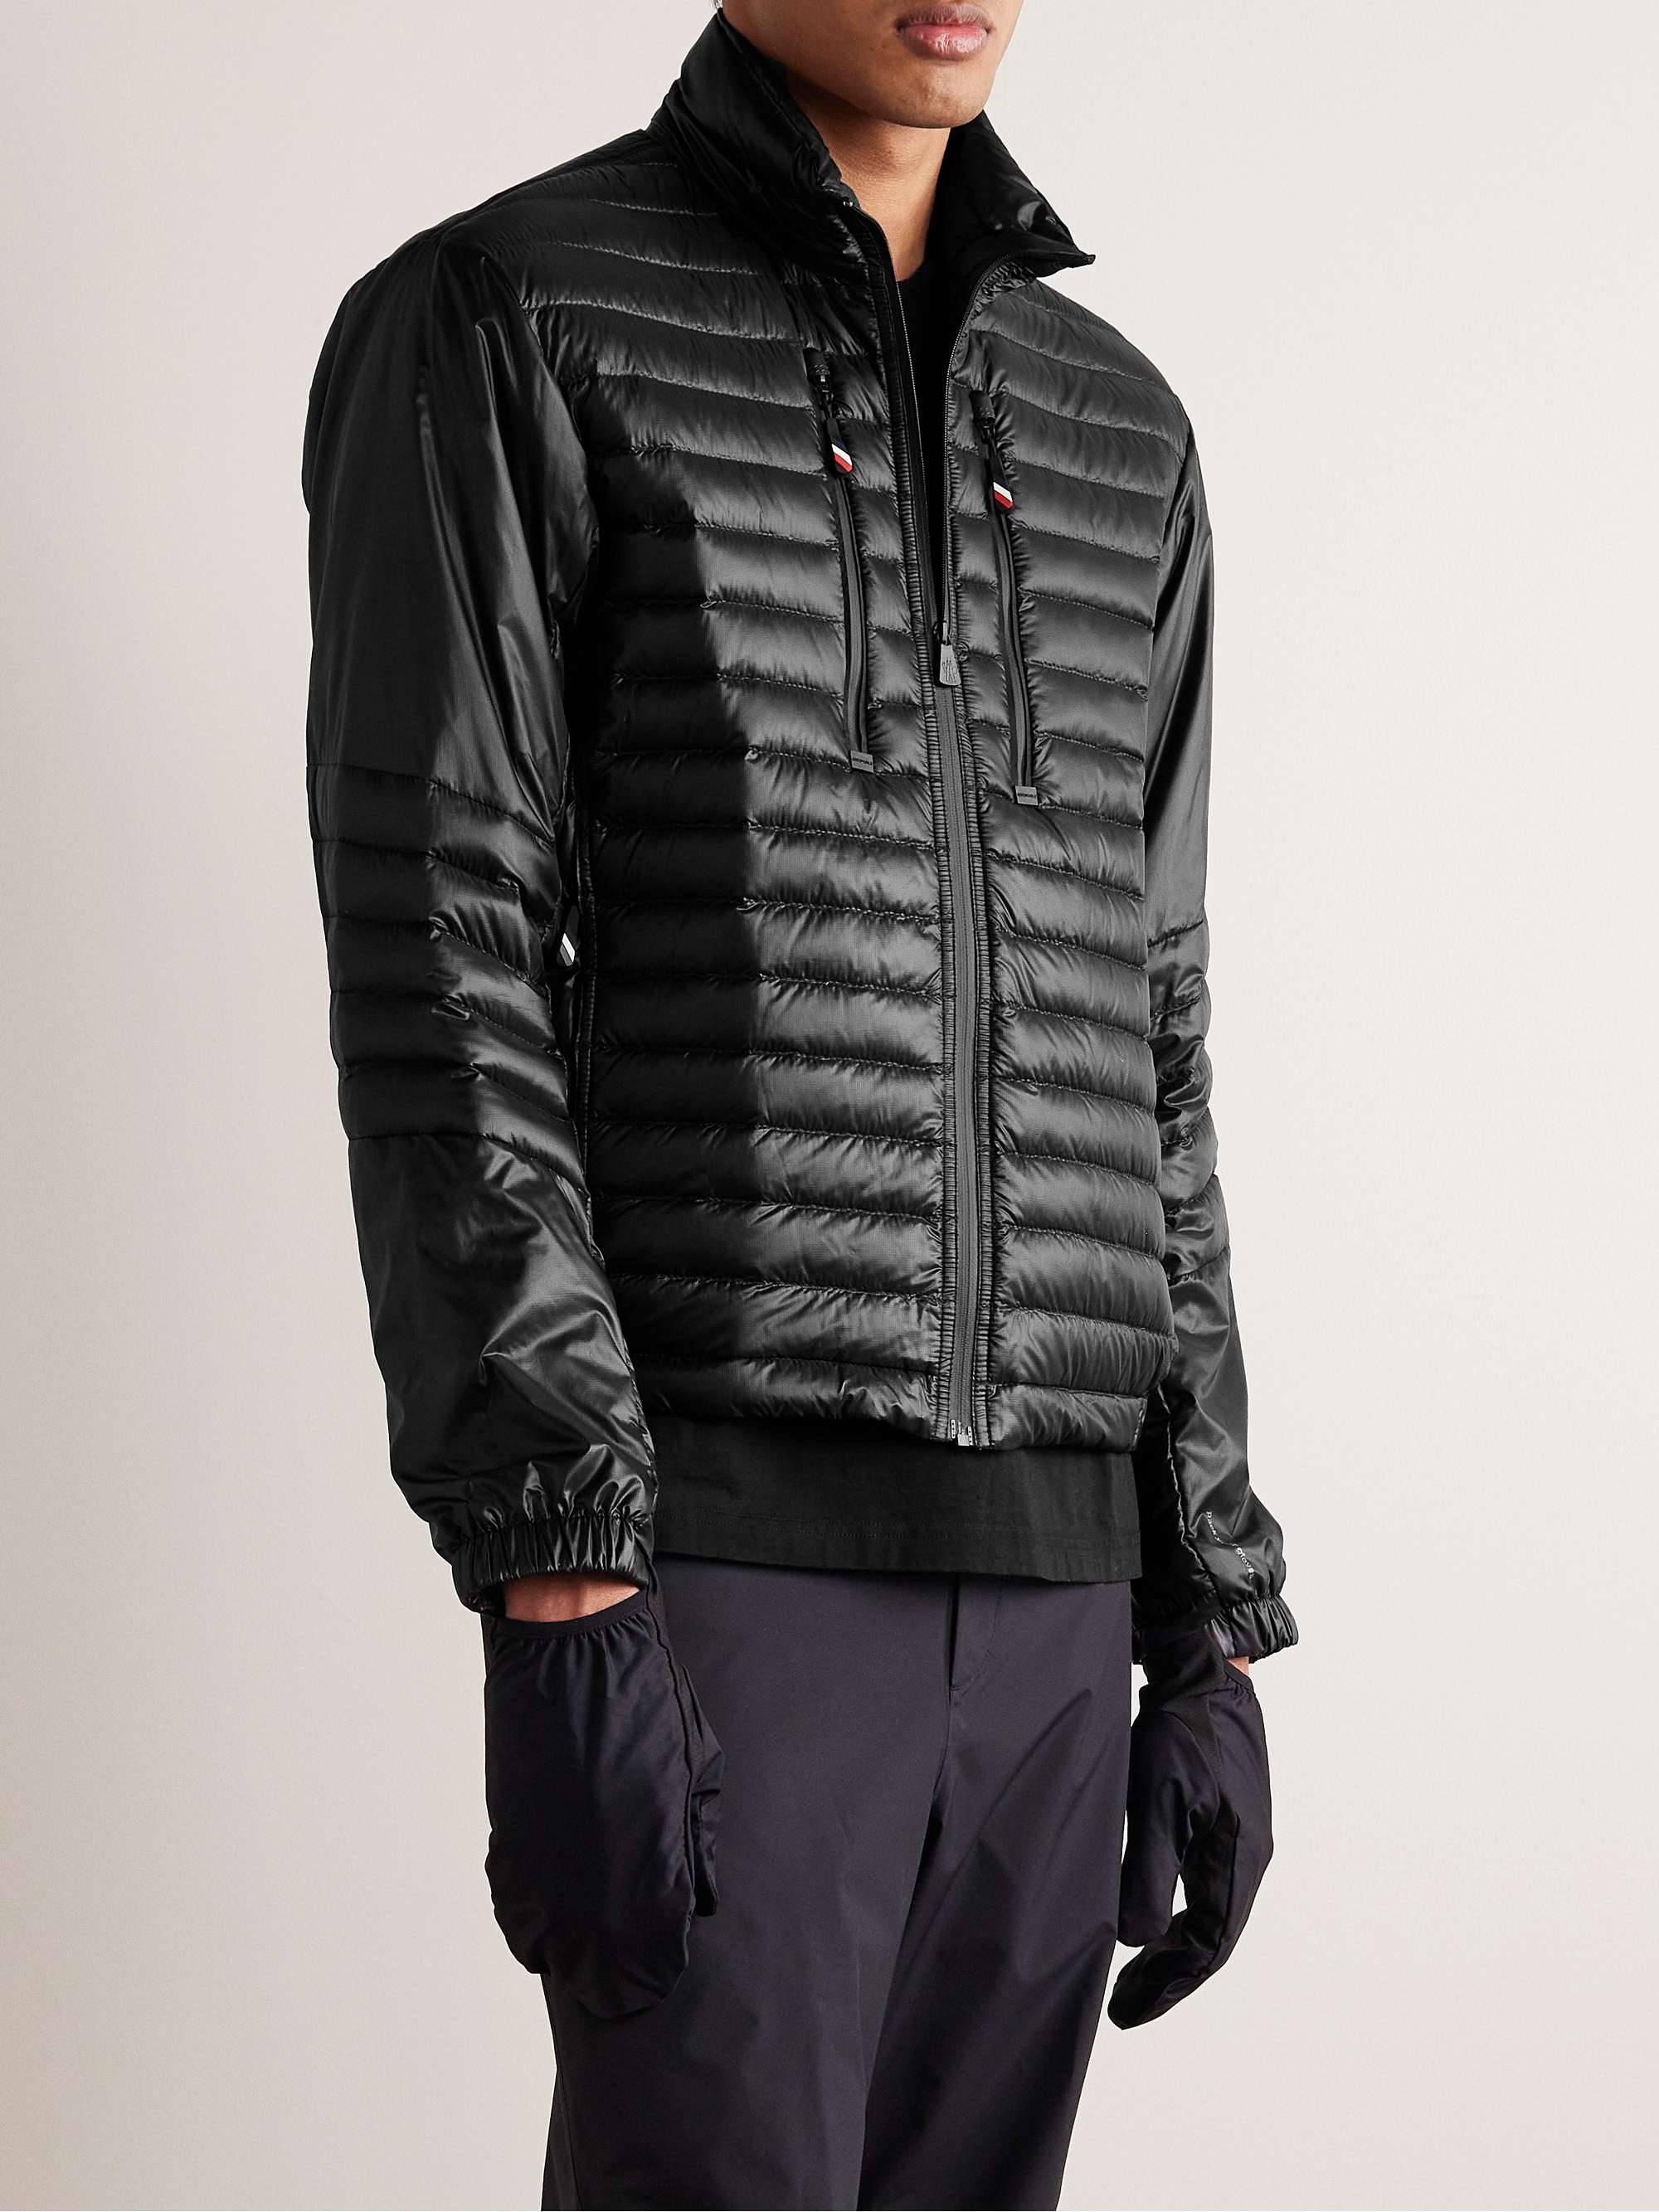 MONCLER GRENOBLE Althaus Quilted Padded Ripstop Jacket | MR PORTER